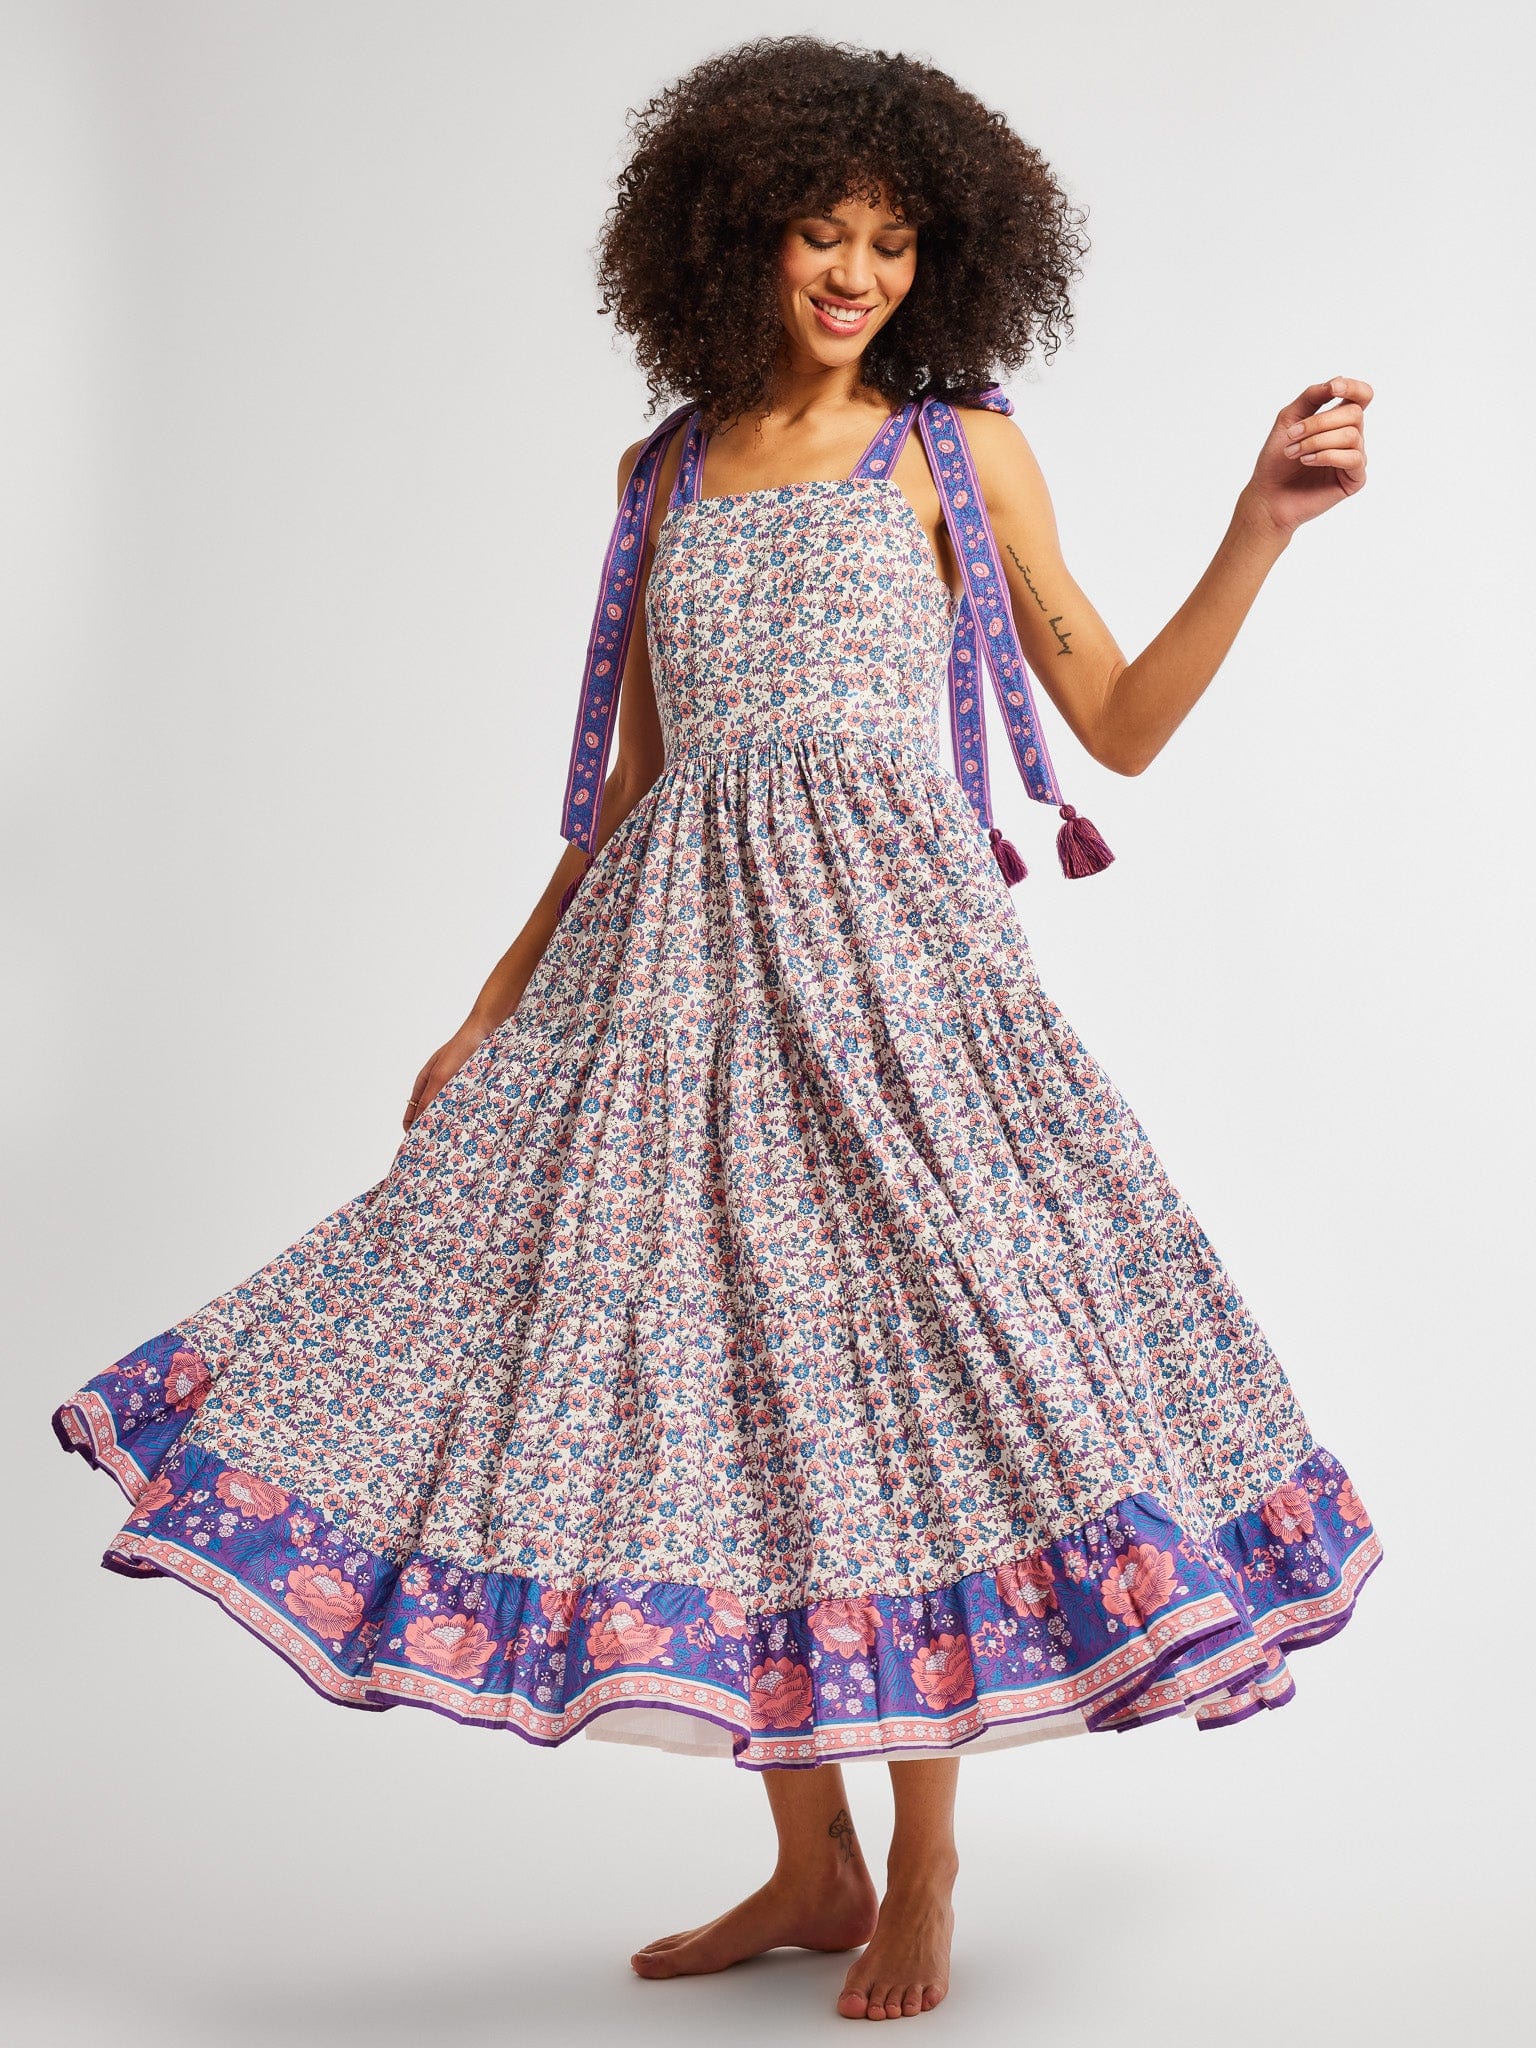 MILLE Clothing Daphne Dress in Bluebell